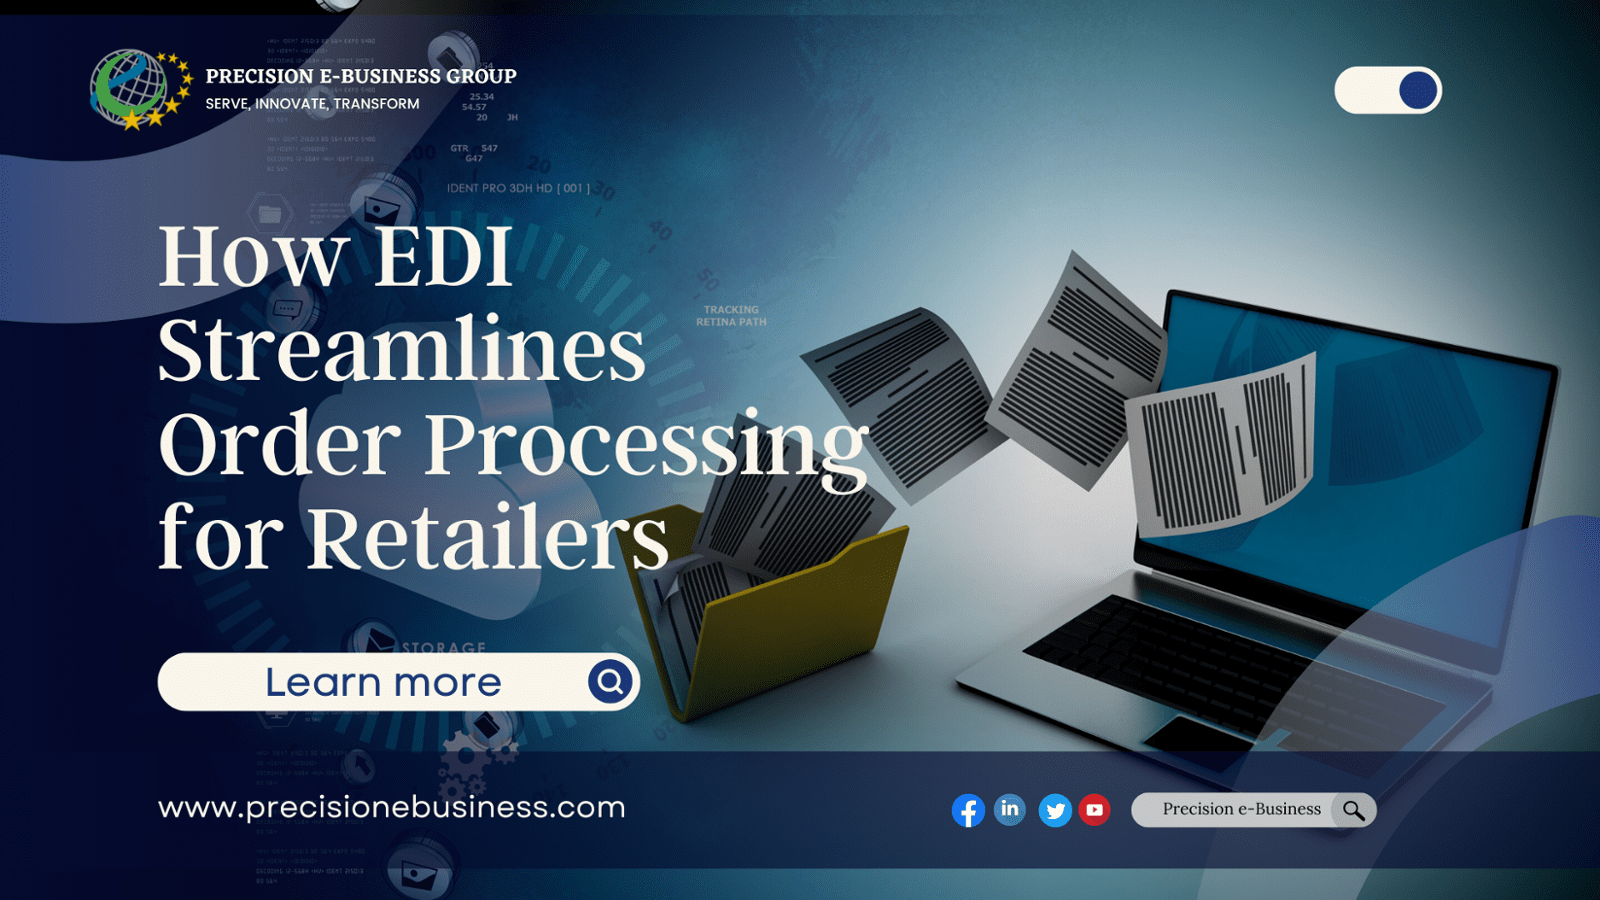 How EDI Streamlines Order Processing for Retailers